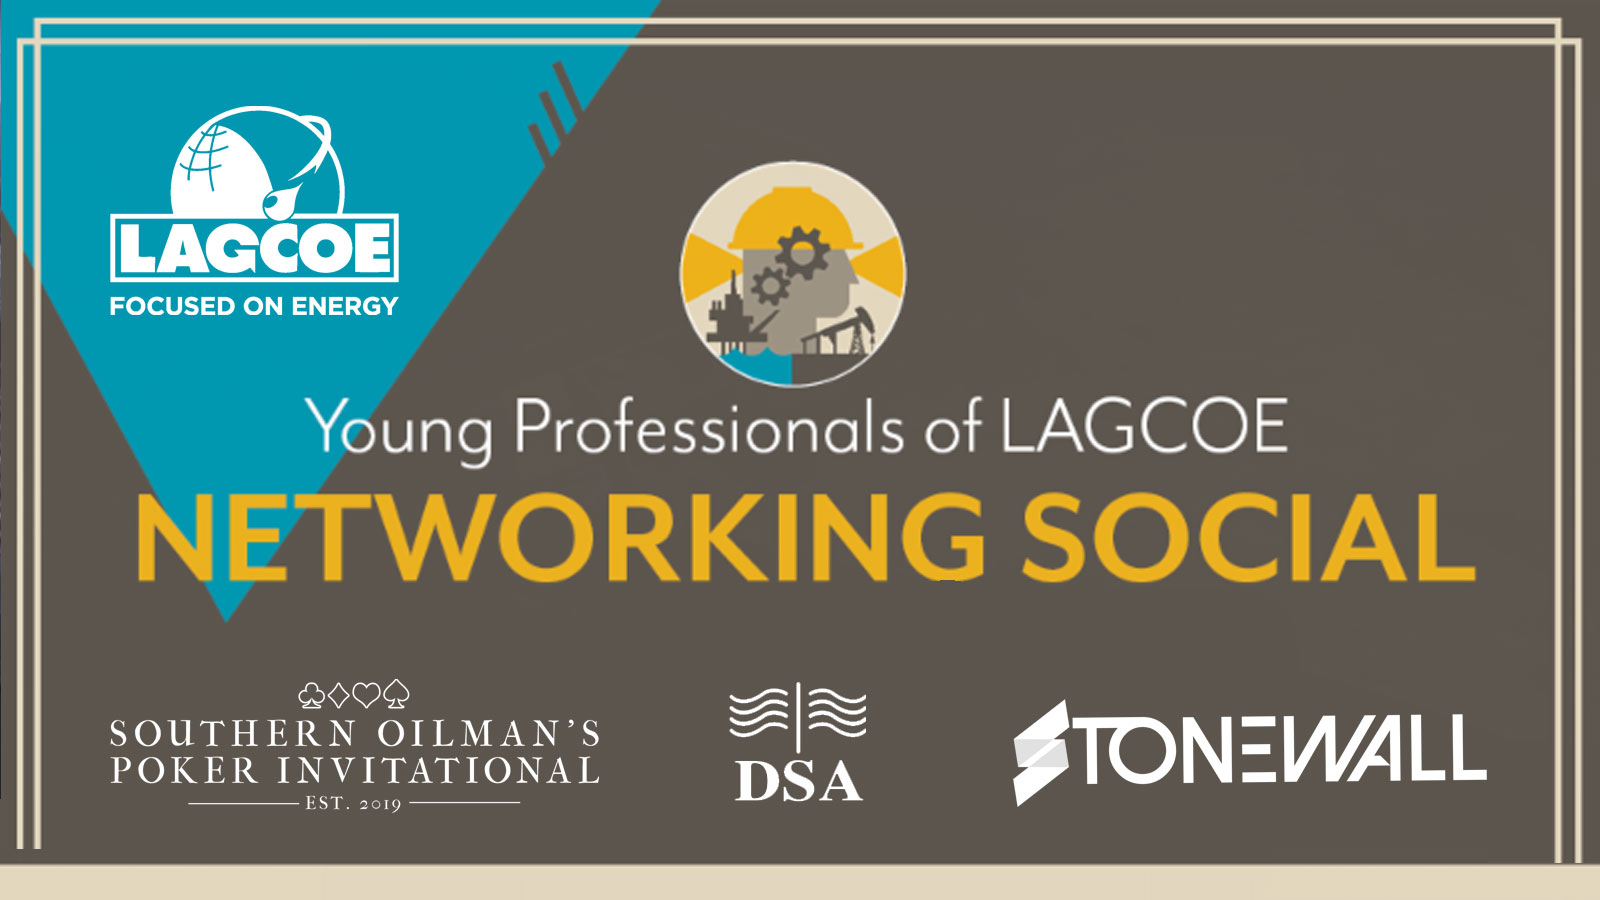 Stonewall Sponsors LAGCOE Young Professionals Network